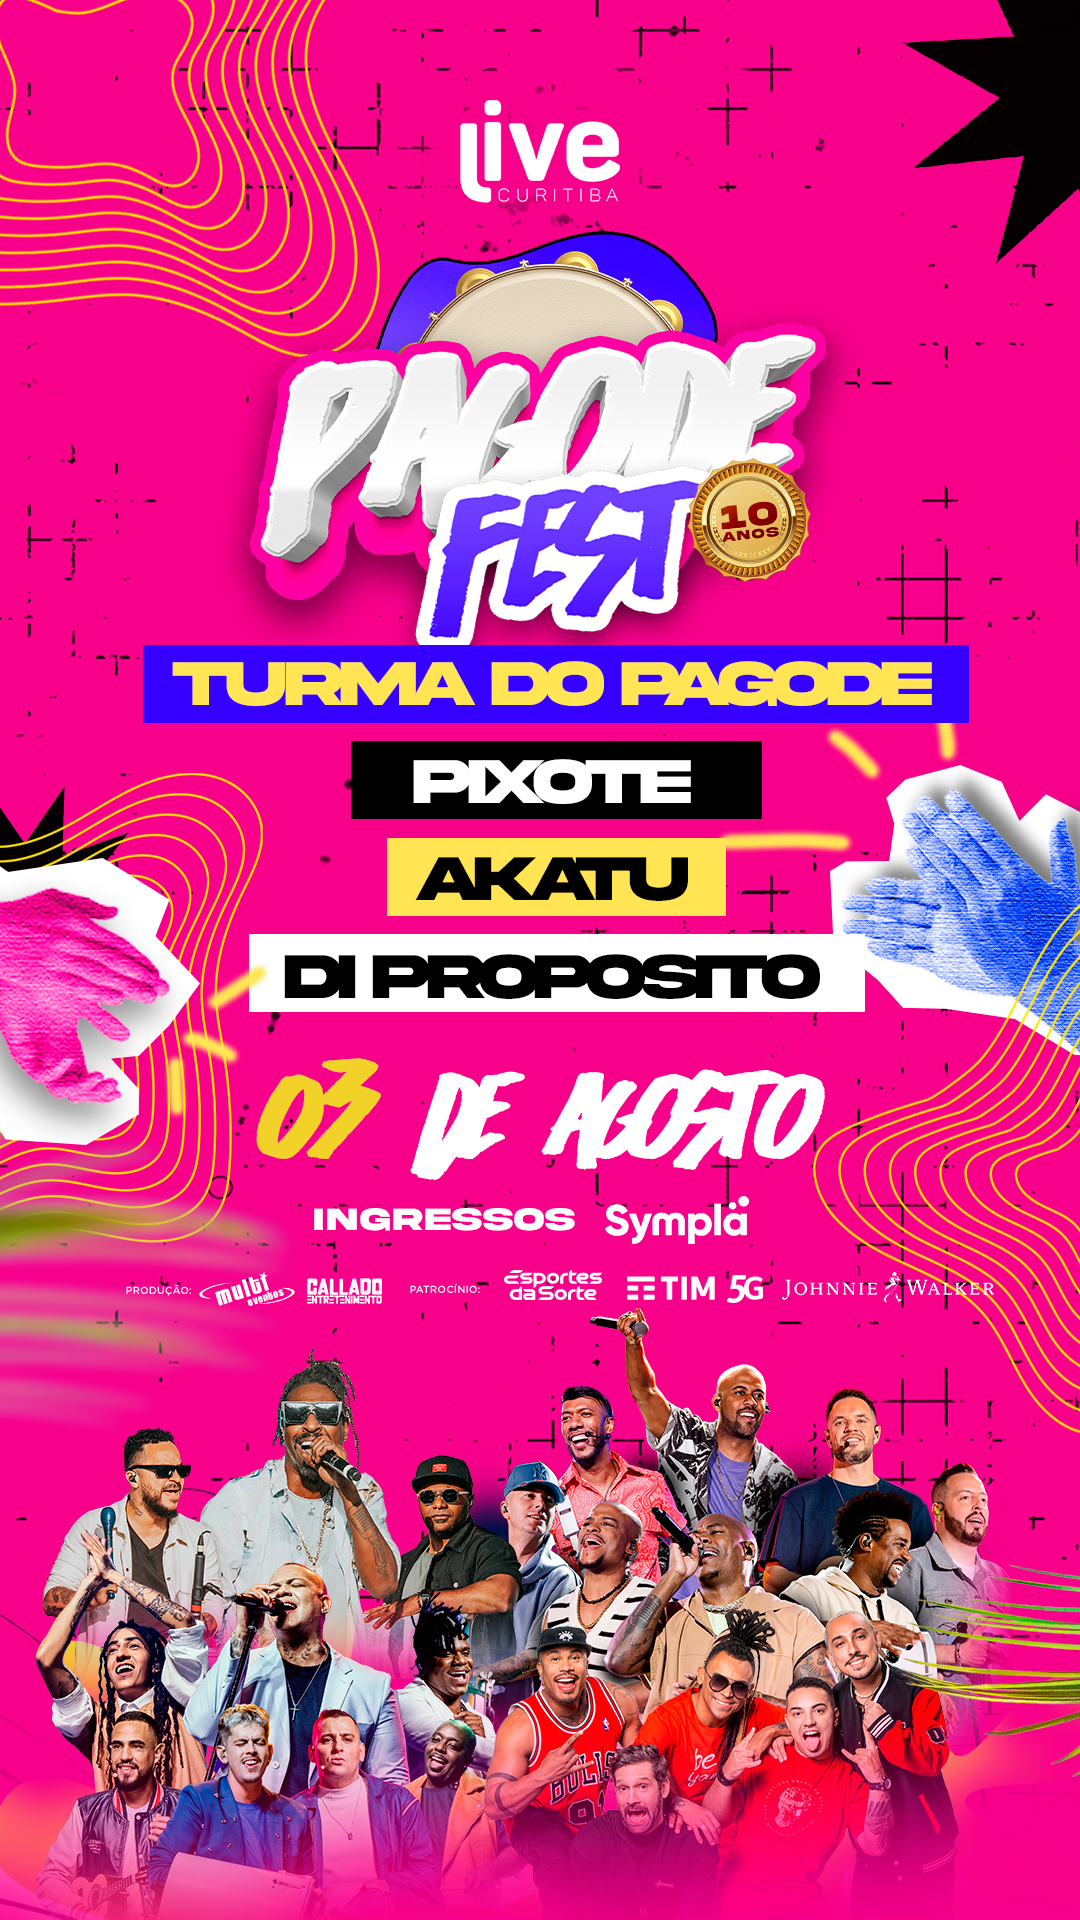 SITE PAGODE FEST